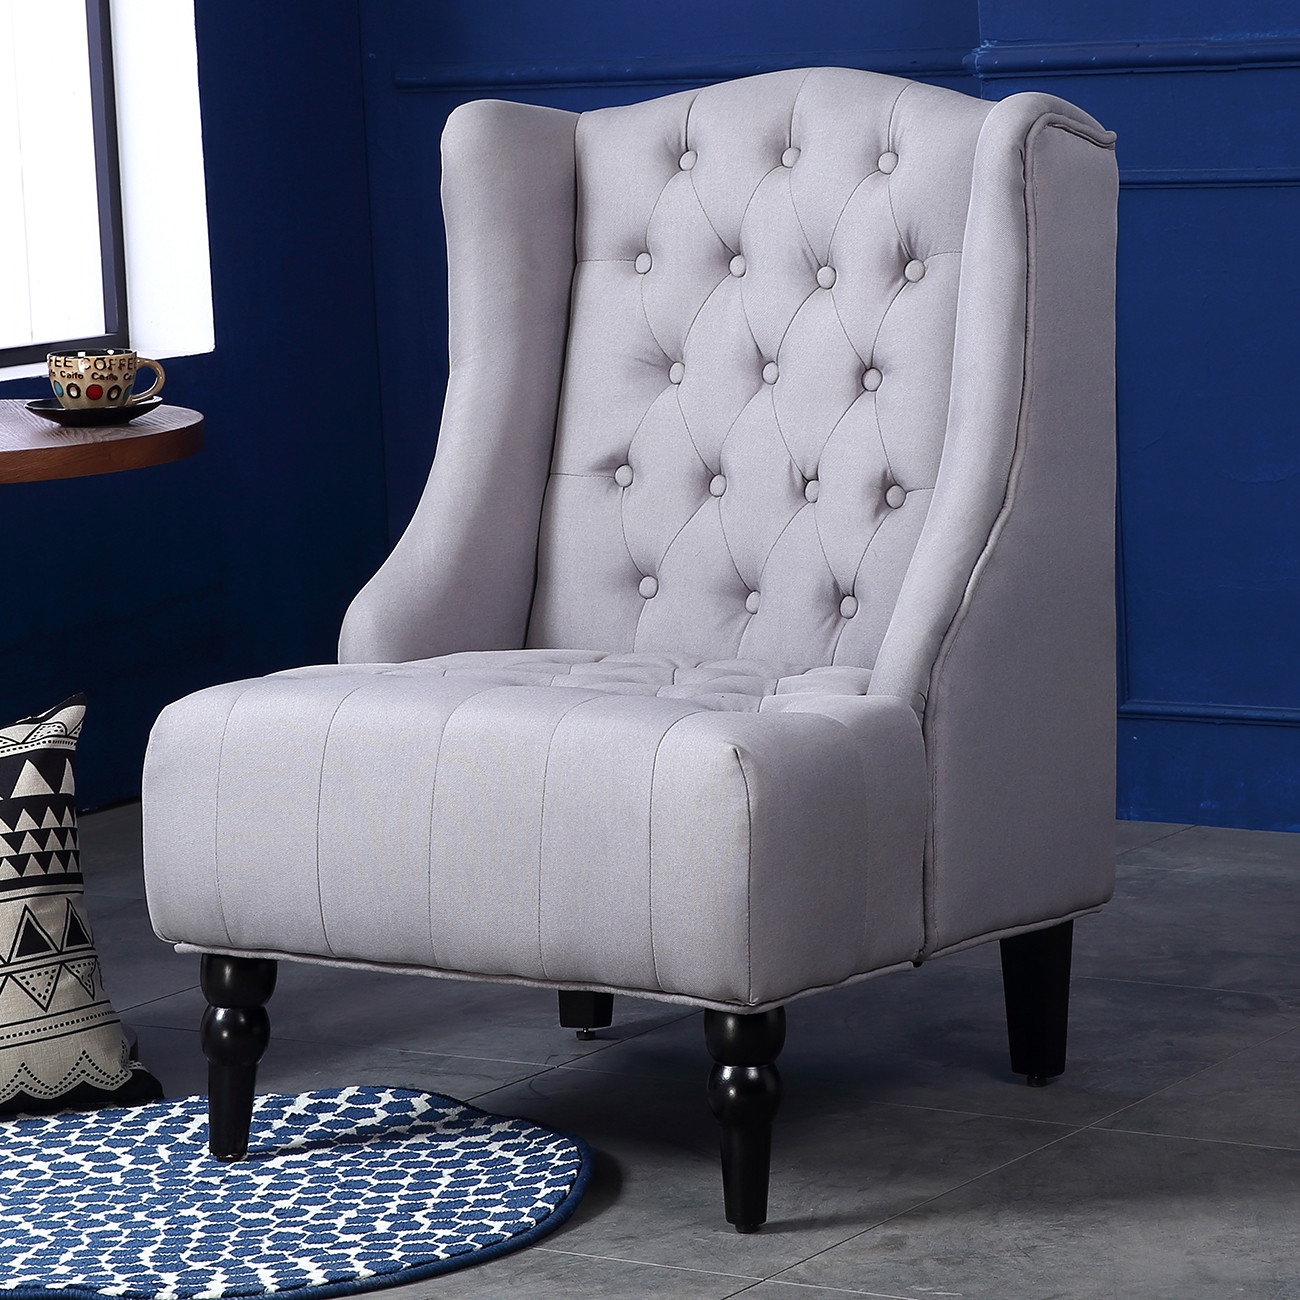 High Back Living Room Chair
 Wingback Accent Chair Tall High back Living Room Tufted